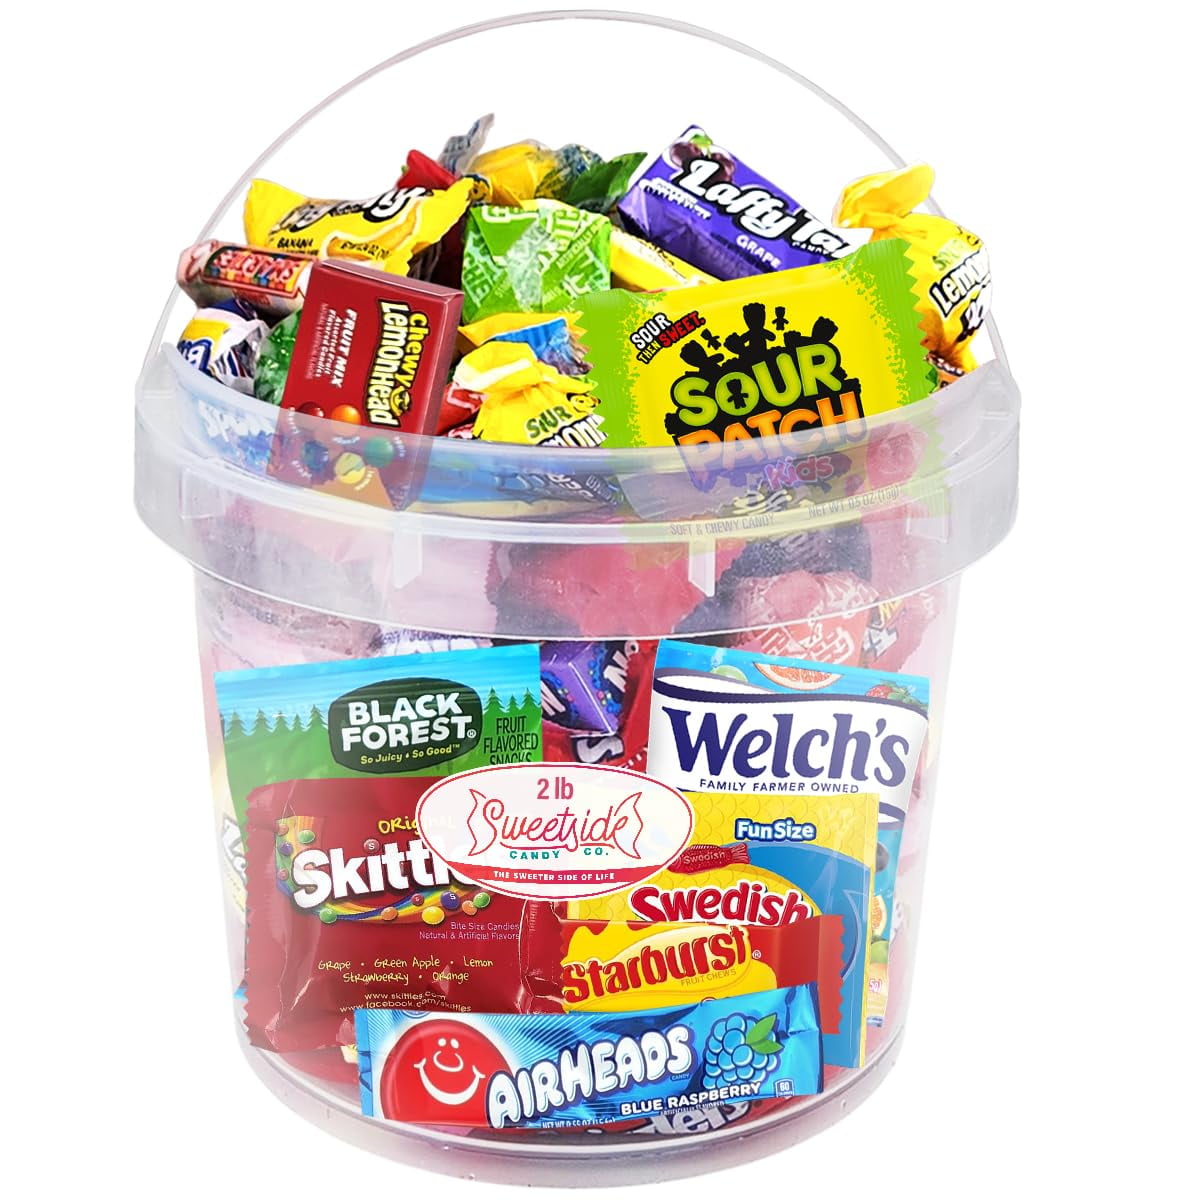 Assorted Candy Box - Gift Basket Snack Box Variety Pack - Food Gift Baskets  for Women and Men - Easter Candy, Birthday Box, Movie Night, Inmate Care